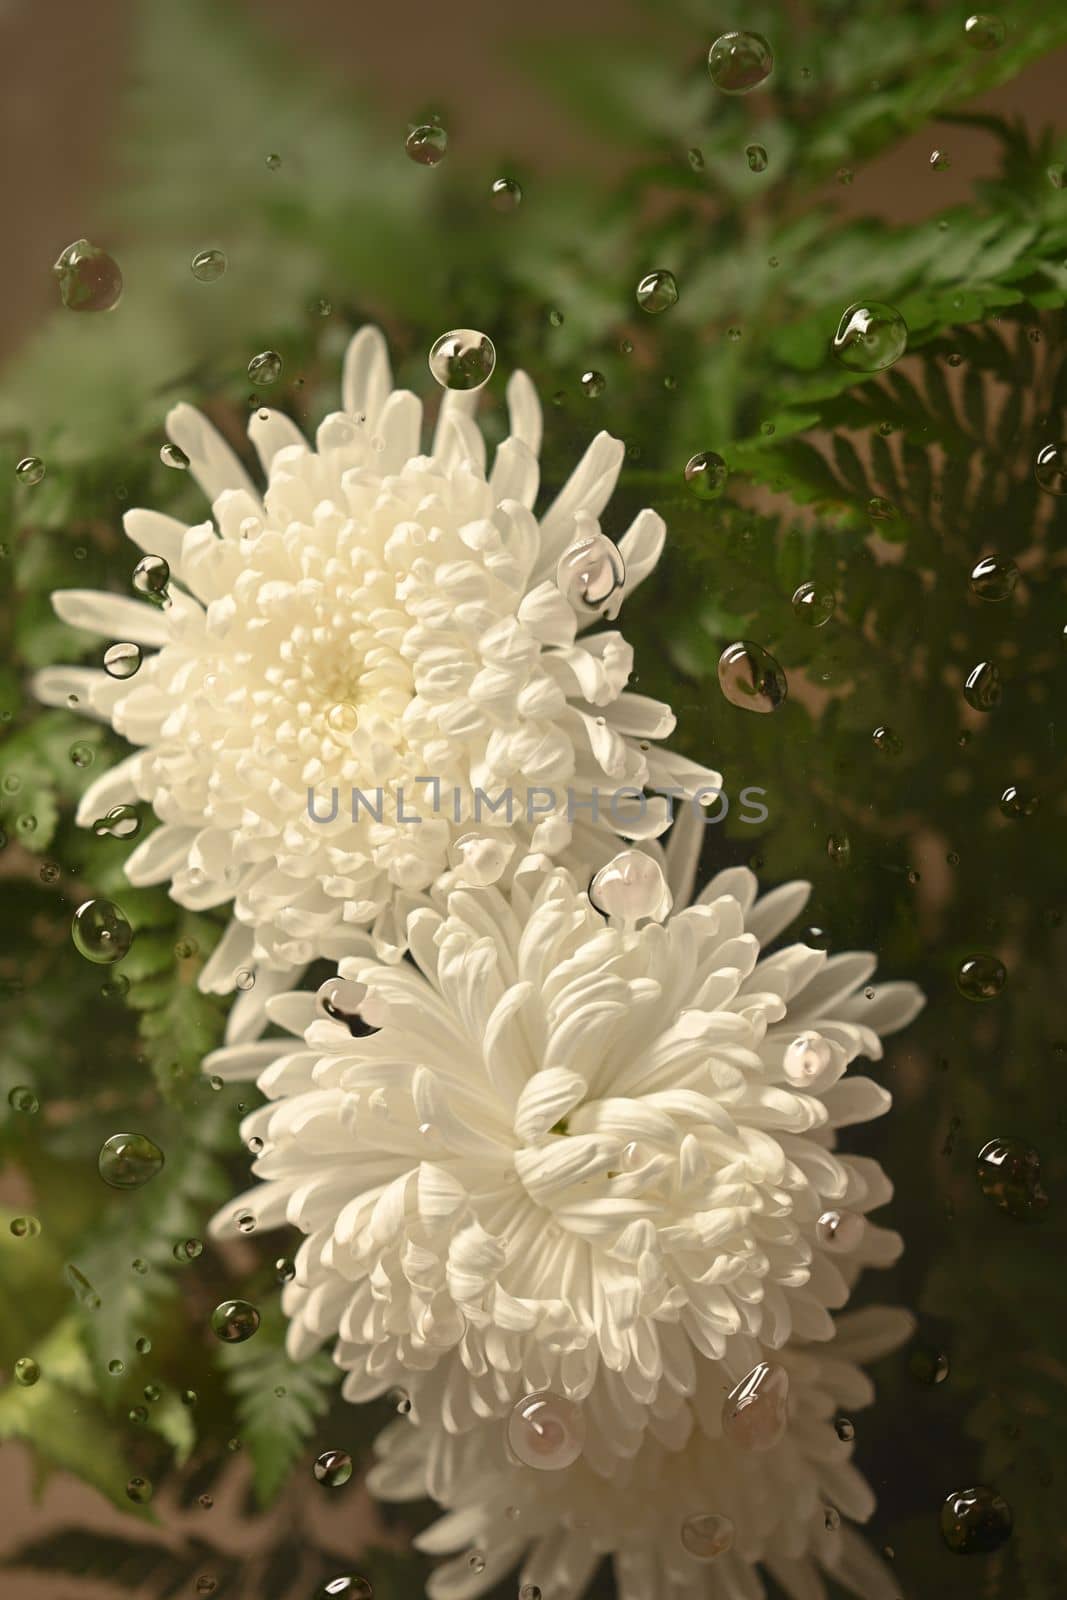 Cold foggy glass with beautiful white chrysanthemums flowers inside with dripping water drop, floral botanical wallpaper by prathanchorruangsak